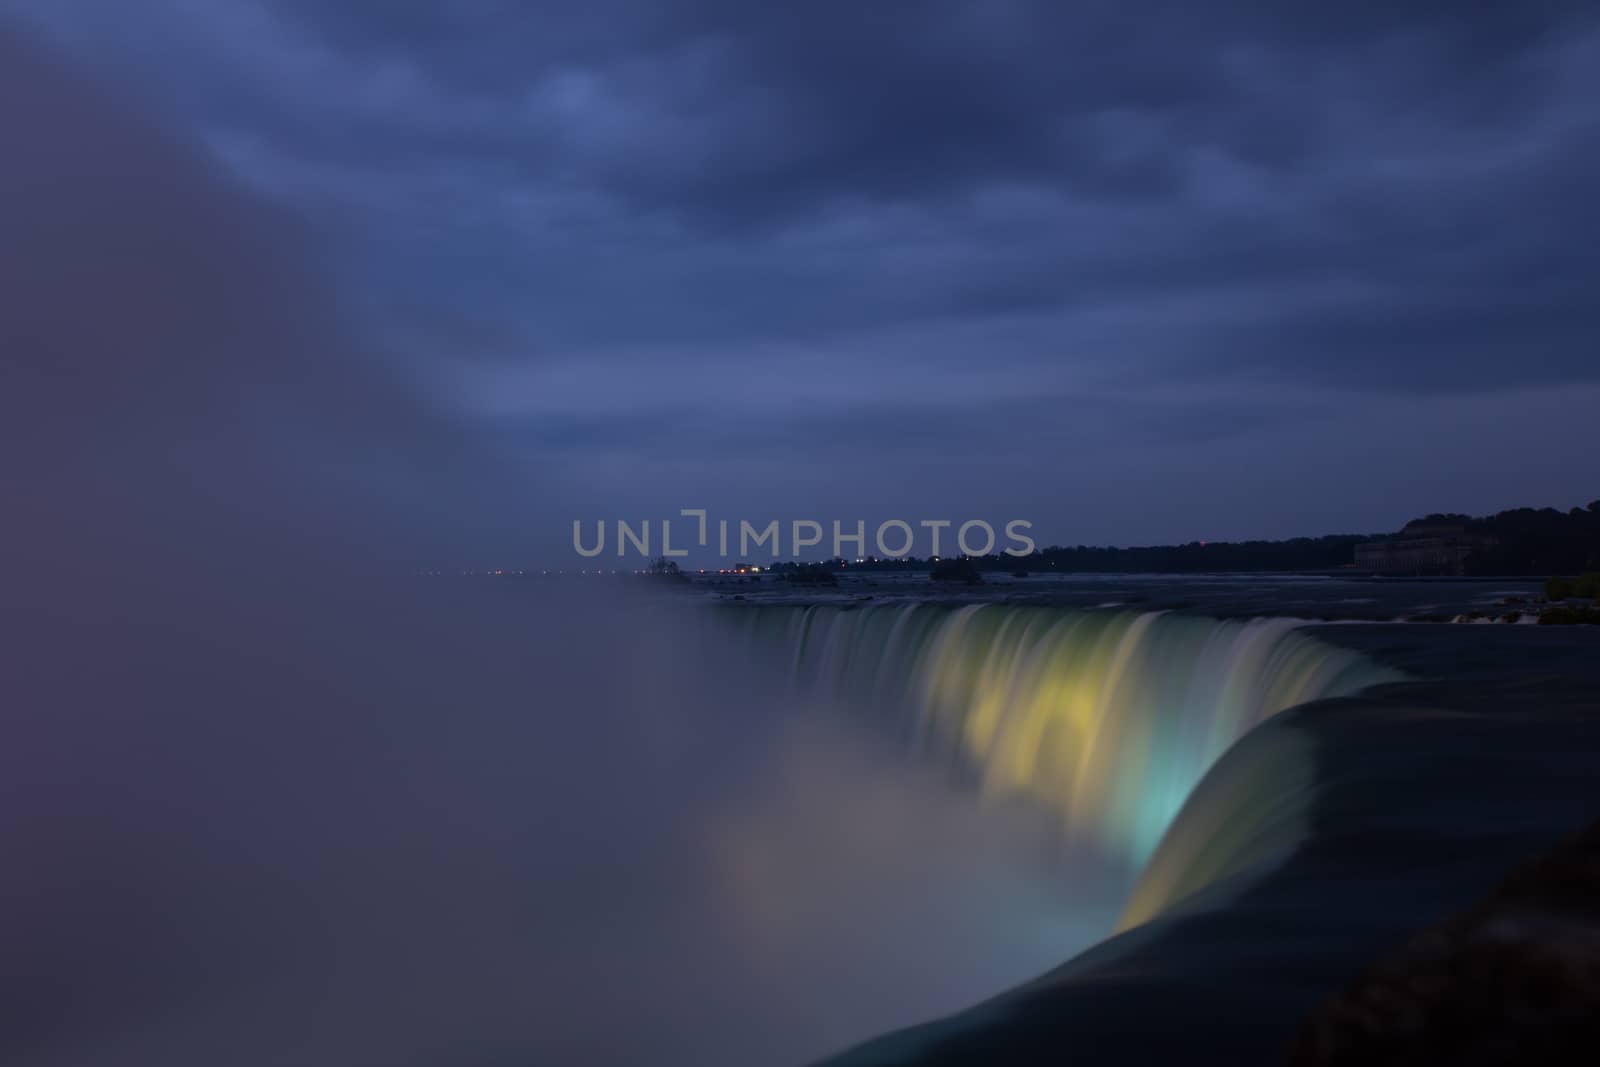 Niagara Falls lit at night by colorful lights by 1shostak